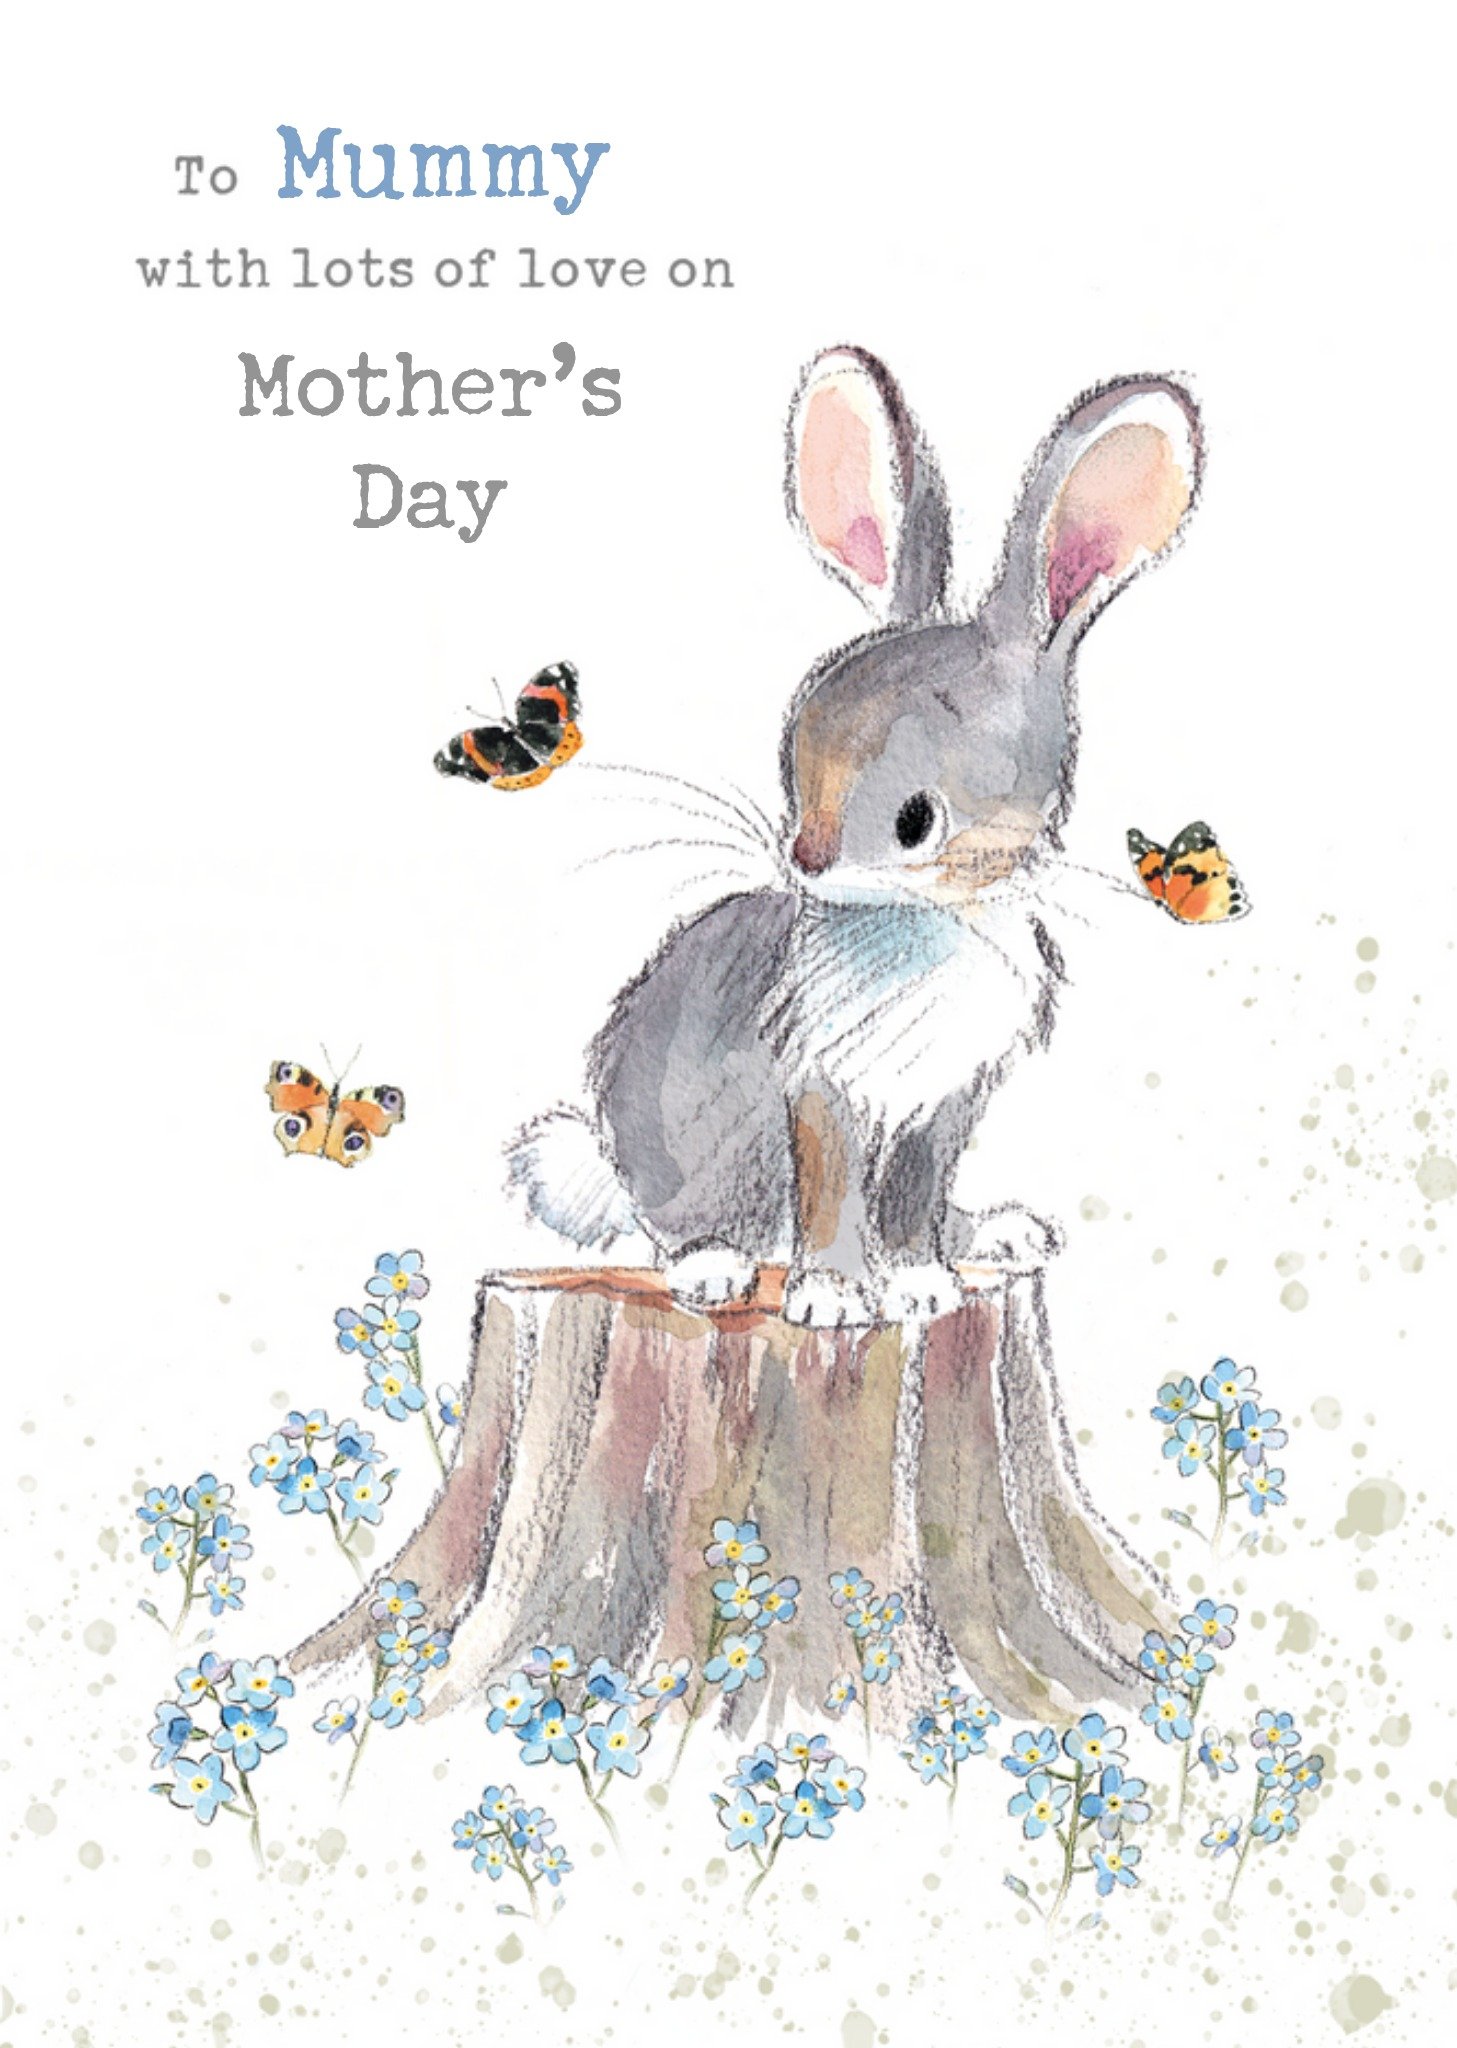 Moonpig Sweet Autumnal Illustrated Rabbit And Butterflies Lots Of Love On Mother's Day Card Ecard